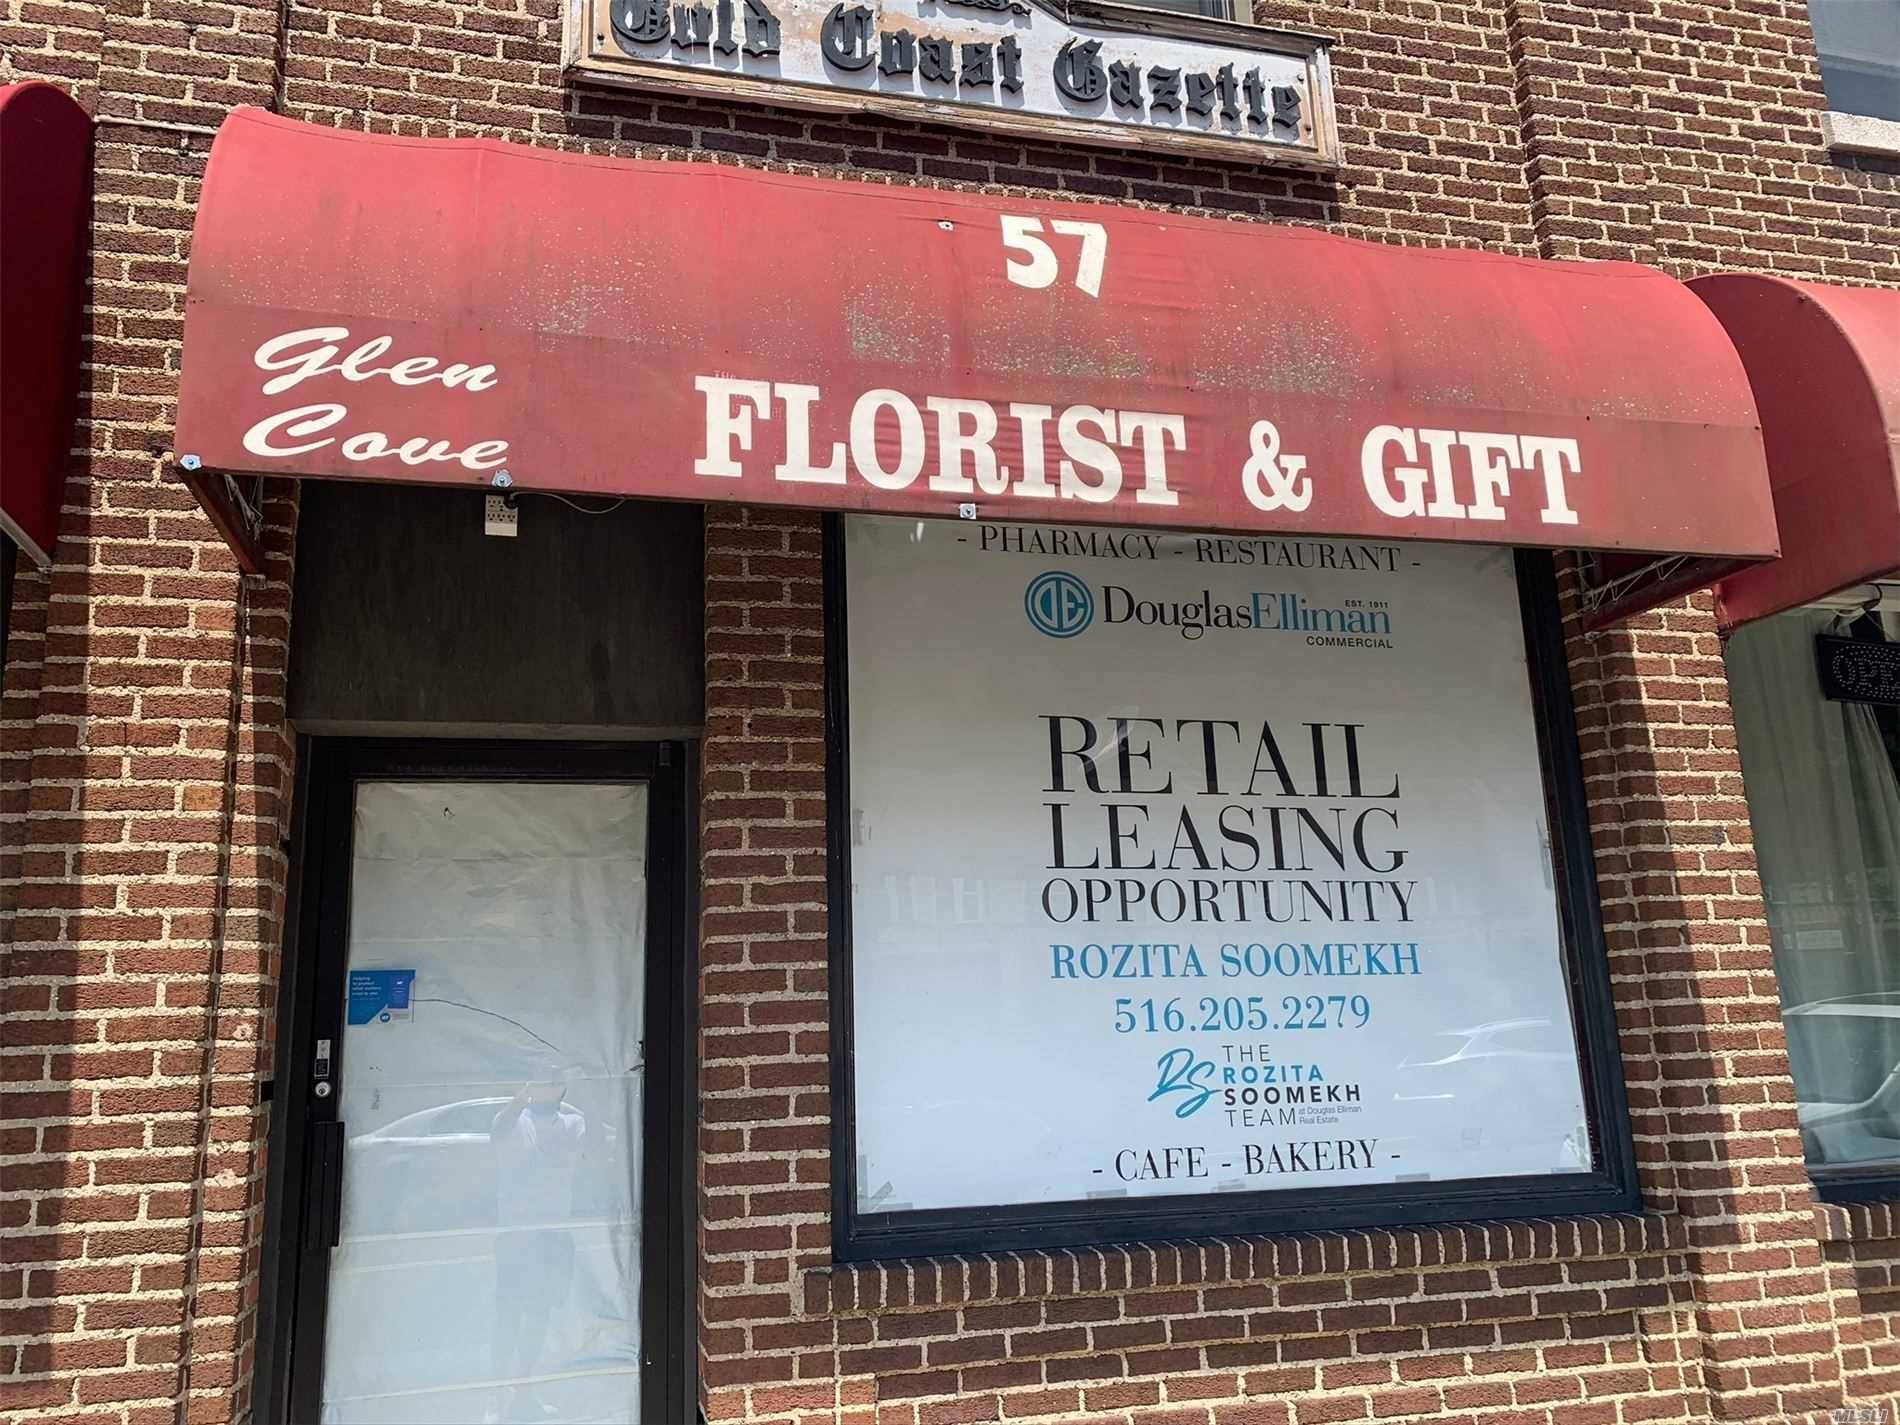 2700 Retail 1500 Basement Back door, 12 FT Ceilings Located in downtown Glen Cove Previously used as flower shop.